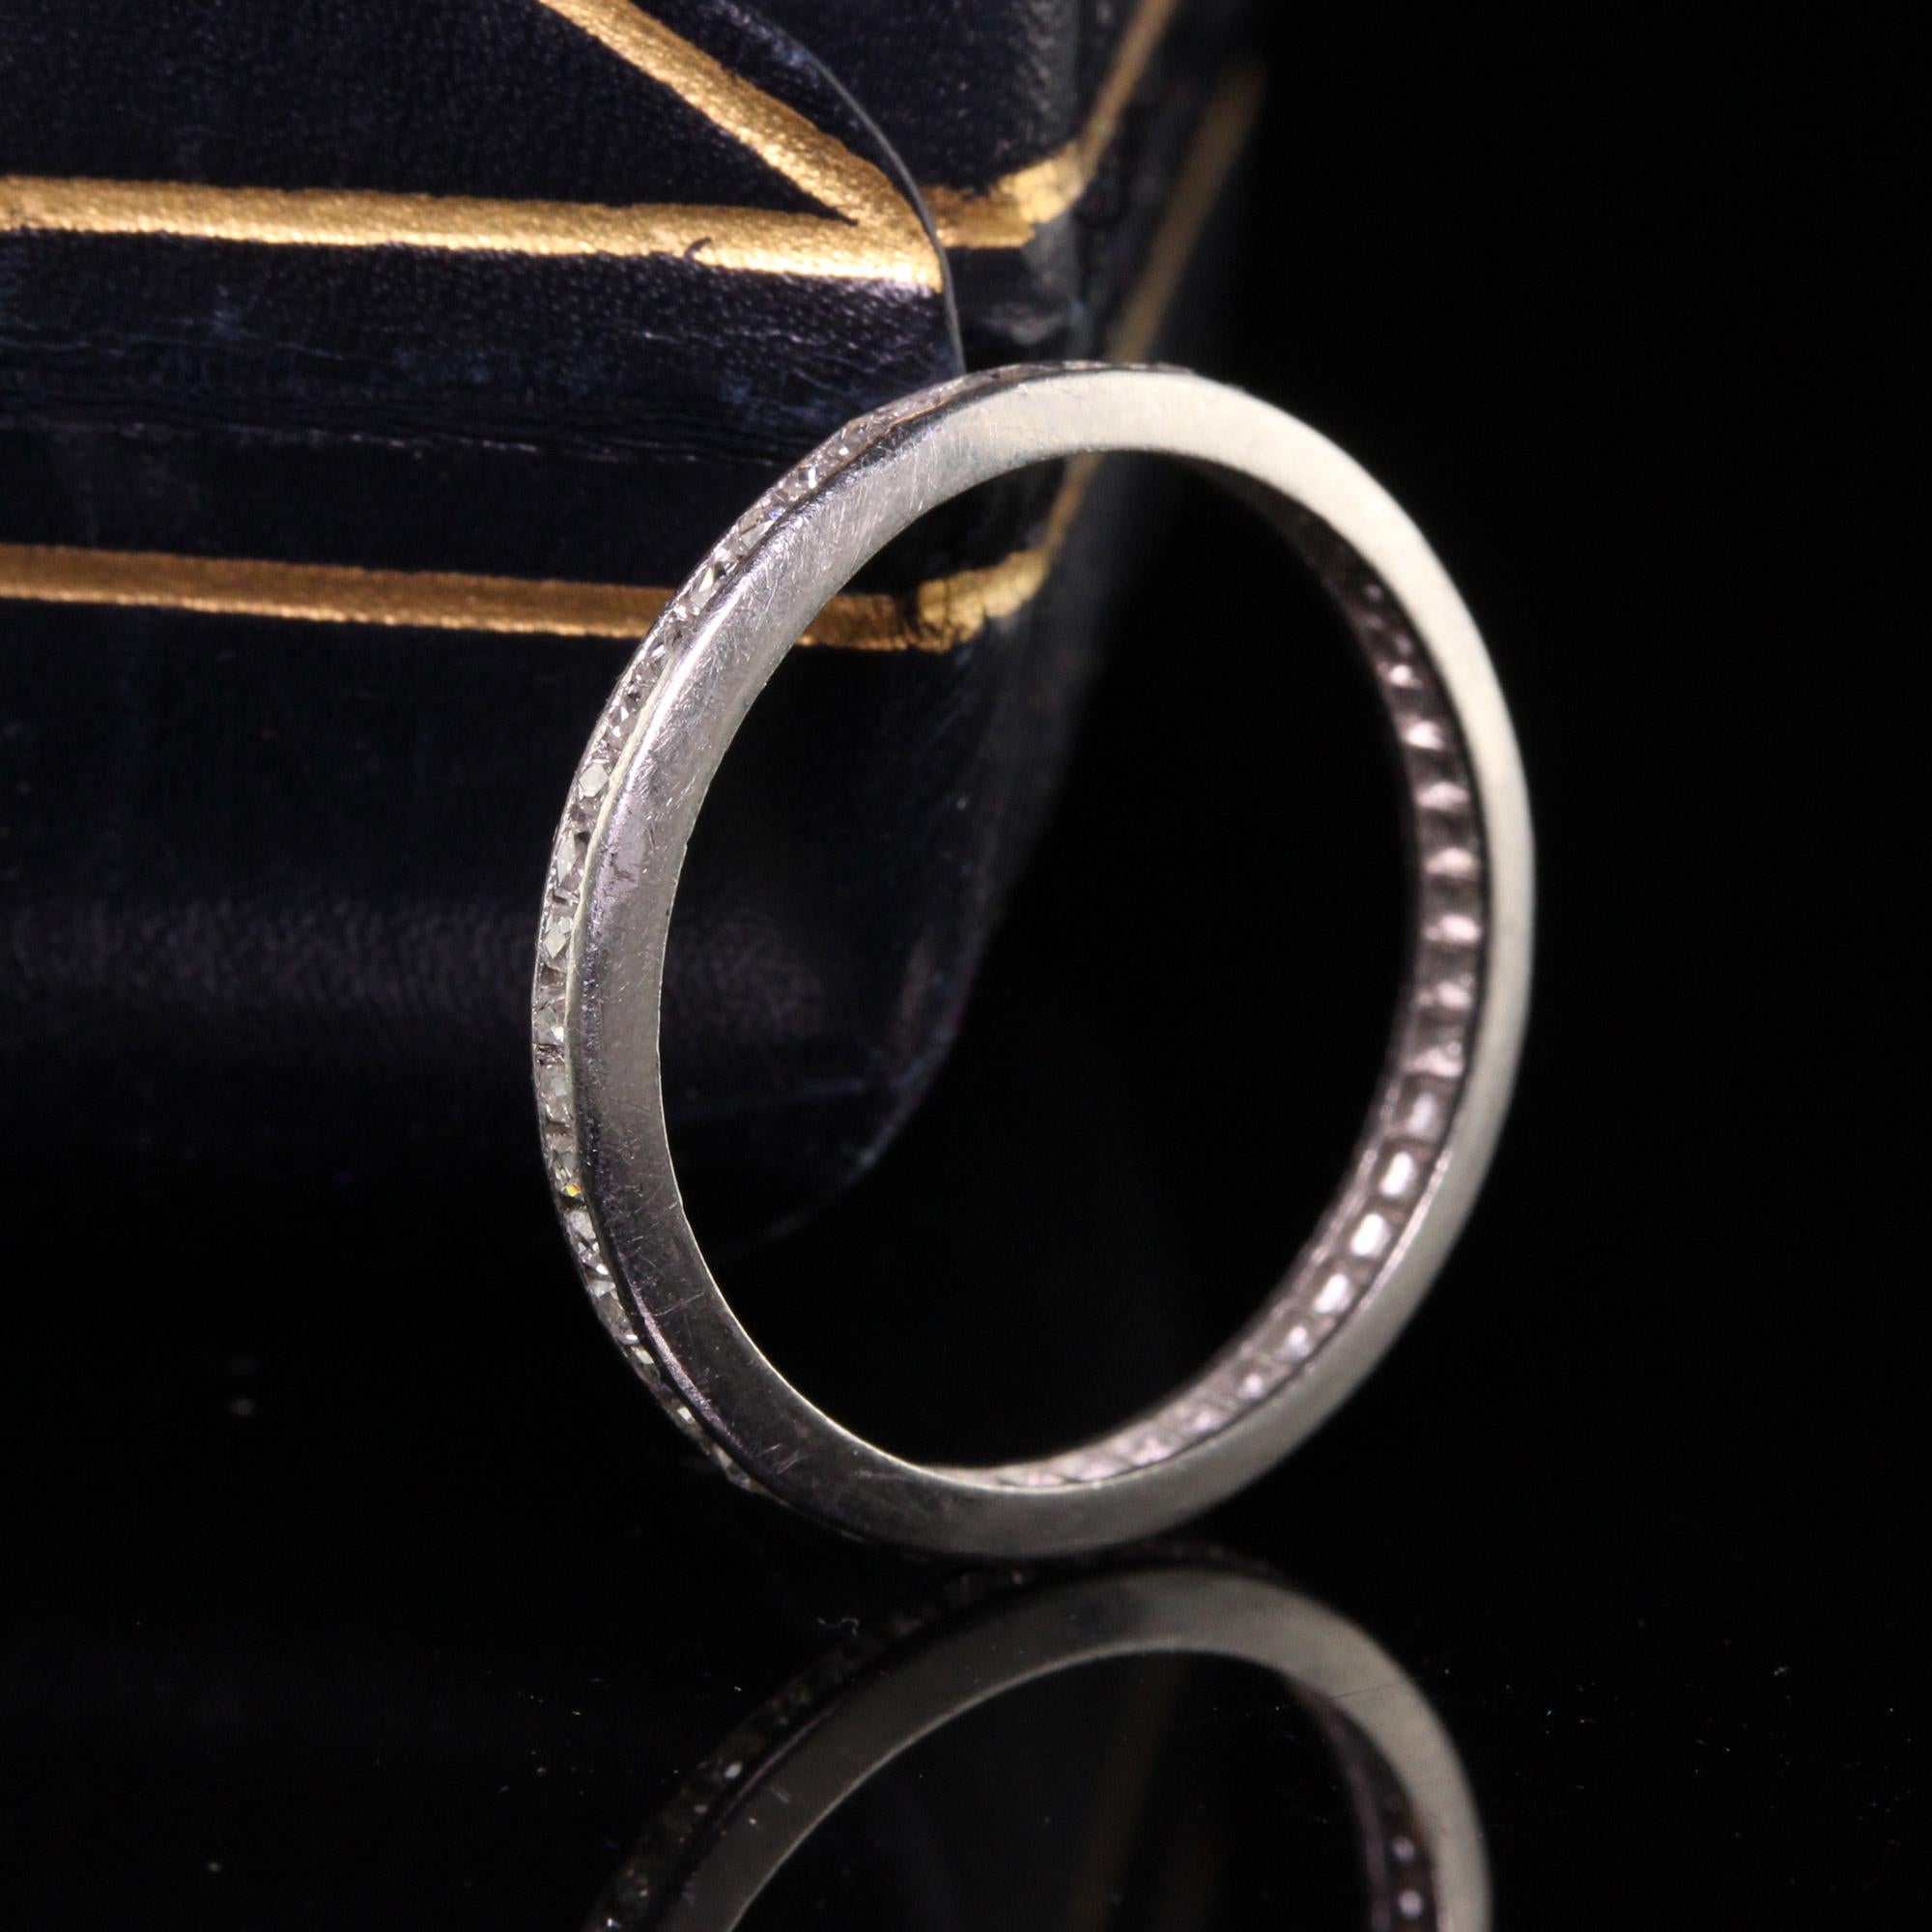 5 1/4 ring size